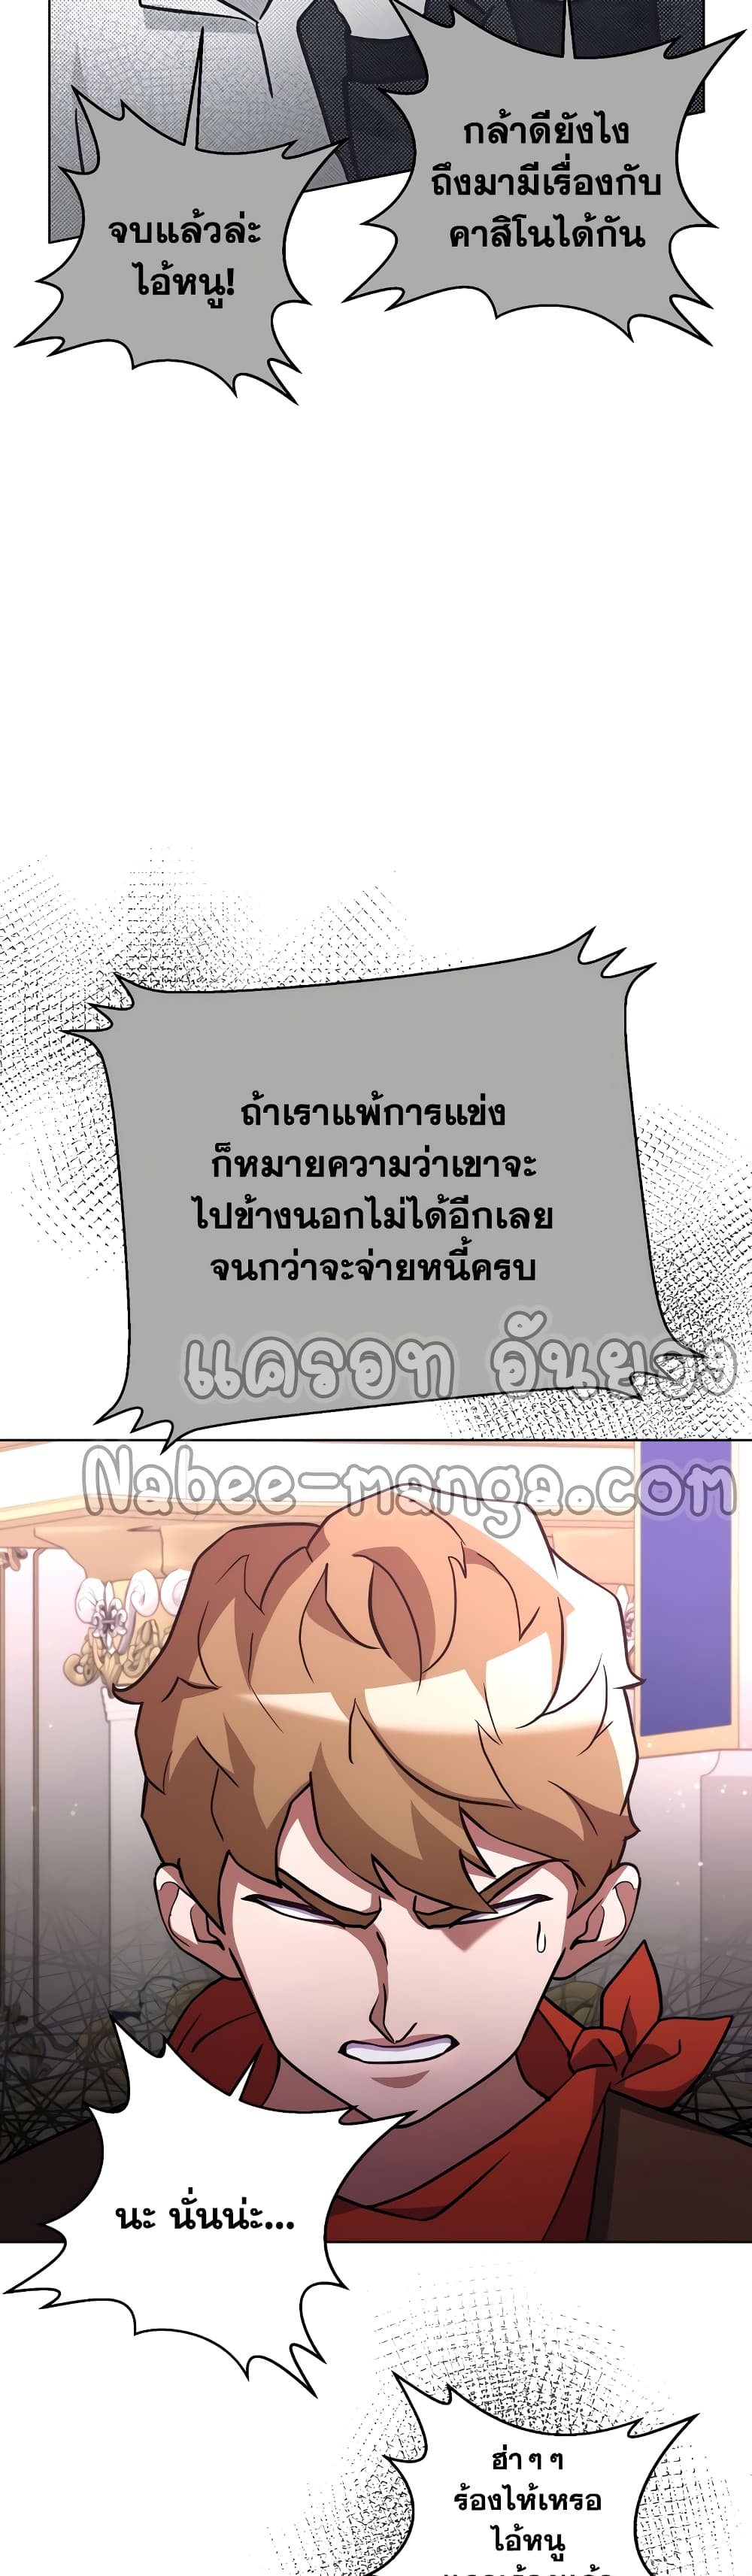 Surviving in an Action Manhwa ตอนที่ 14 (16)